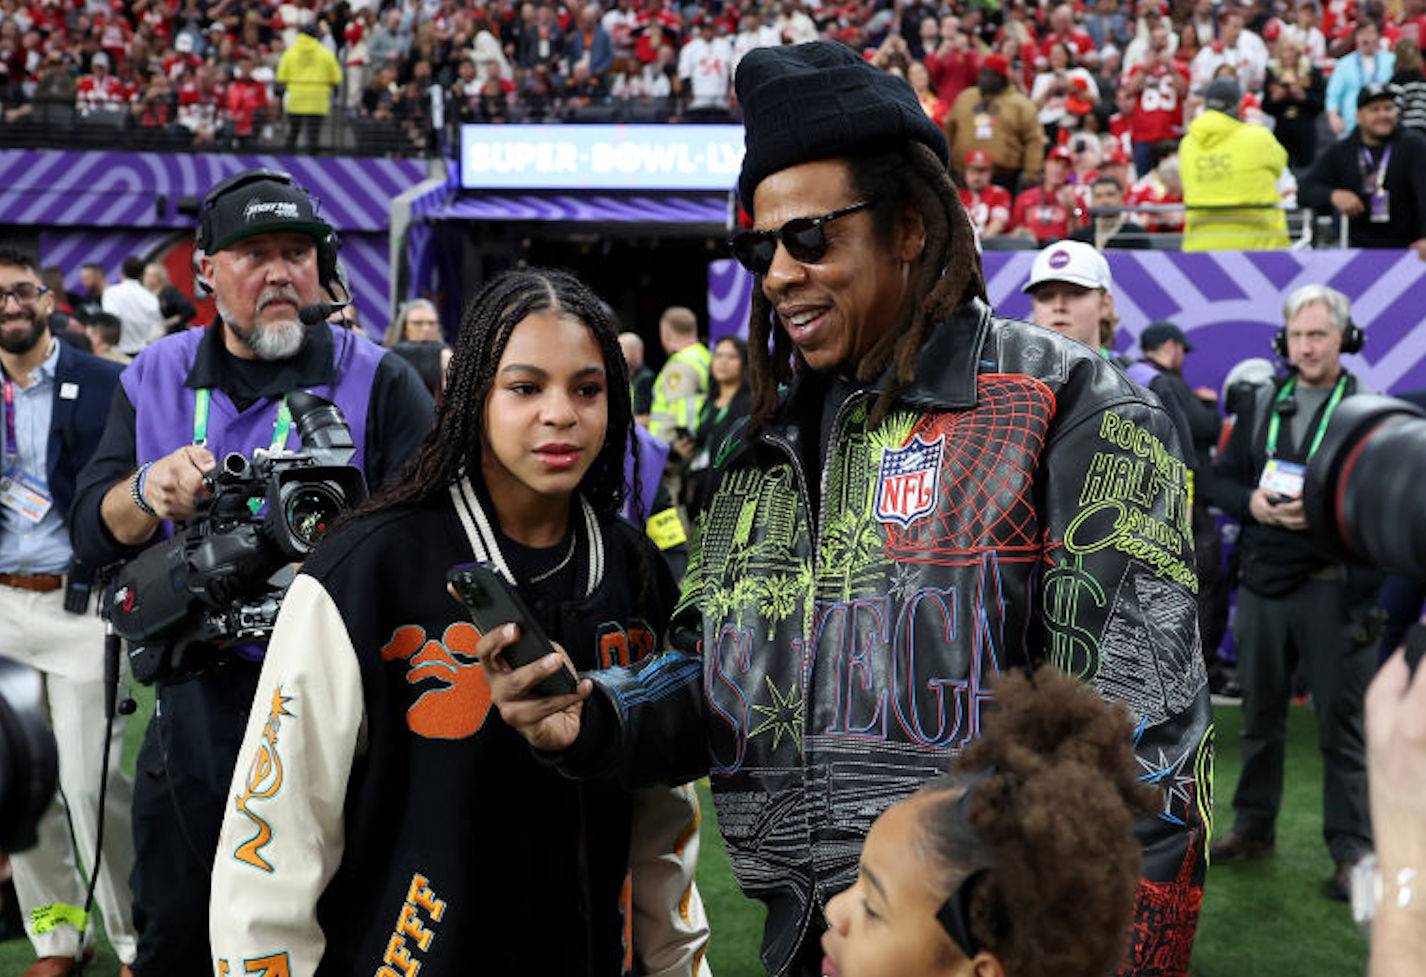 LAS VEGAS, NEVADA - FEBRUARY 11: American Rapper Jay-Z stands on the sidelines with daughter Blue Ivy Carter before Super Bowl LVIII between the against the San Francisco 49ers and Kansas City Chiefs at Allegiant Stadium on February 11, 2024 in Las Vegas, Nevada. (Photo by Ezra Shaw/Getty Images)